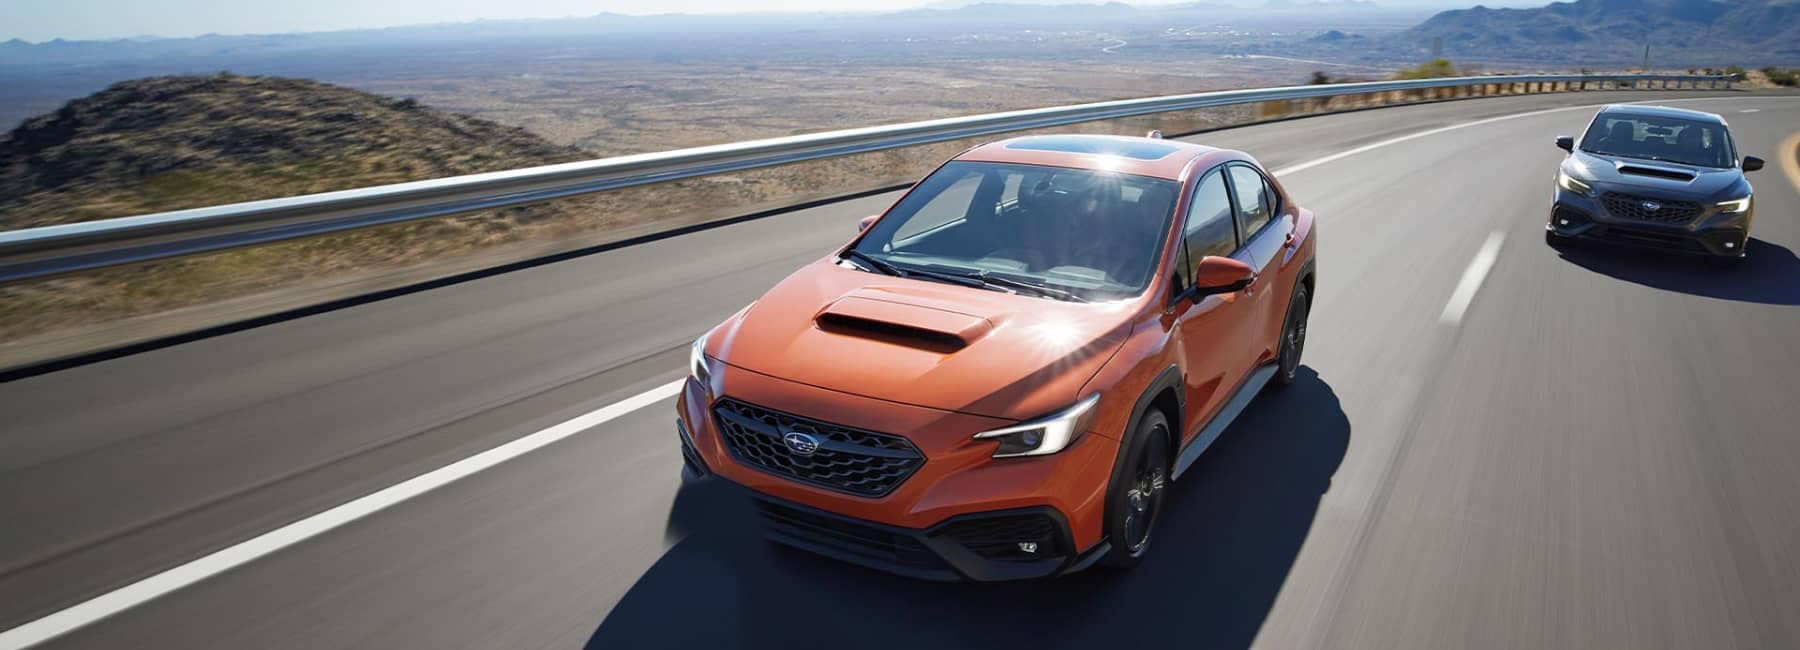 WRX- front view-2 cars on highway-orange_gray